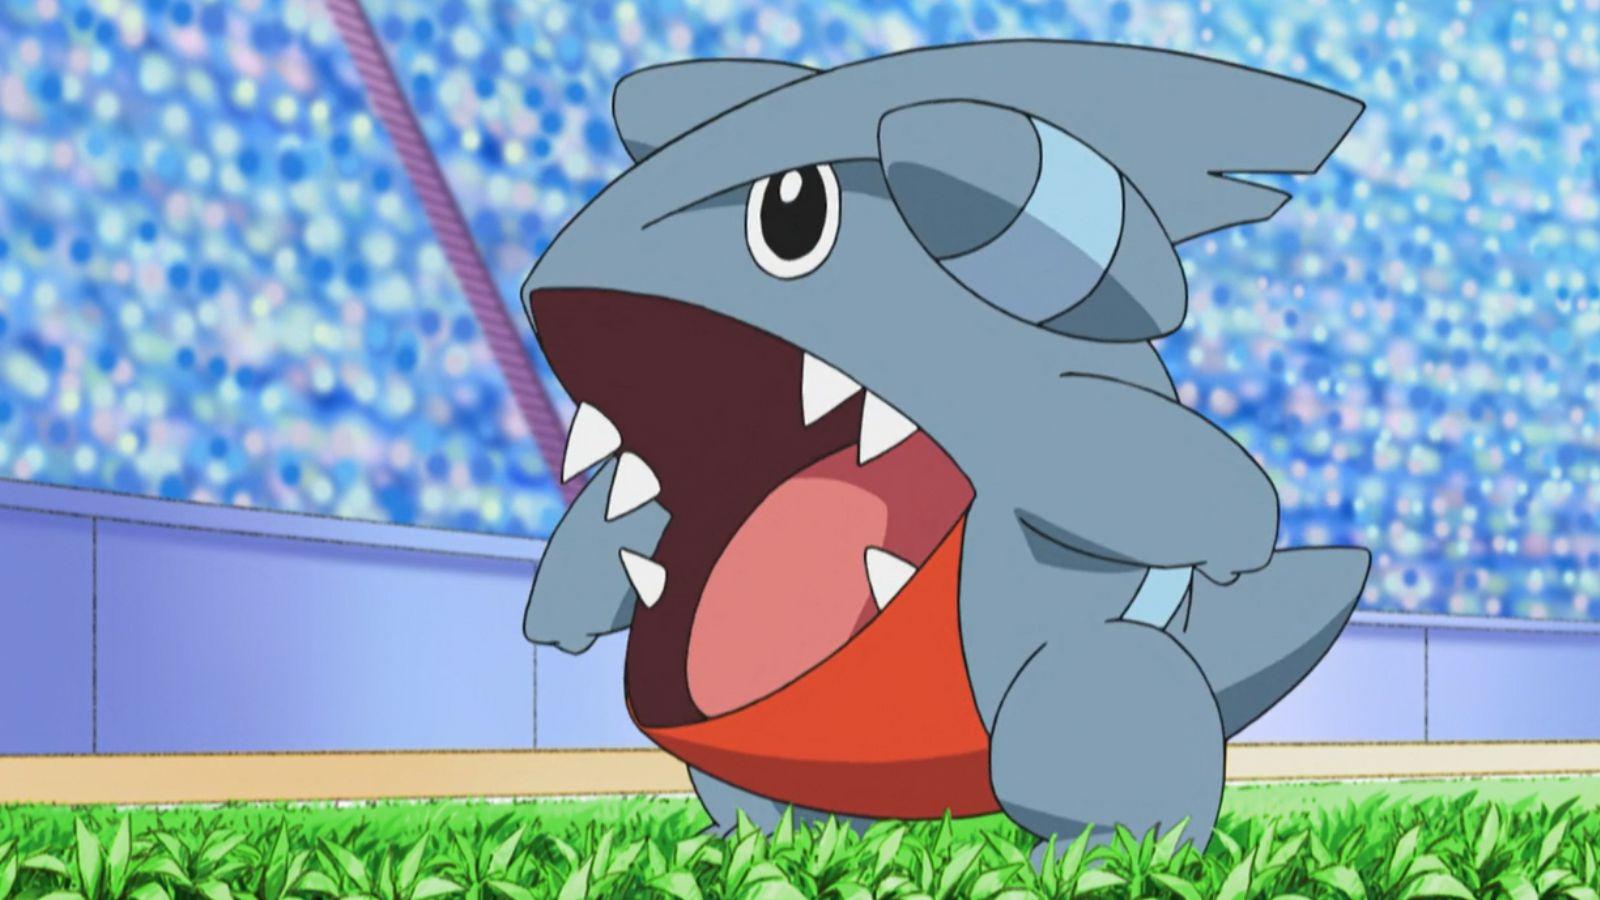 Gible from Pokemon anime.